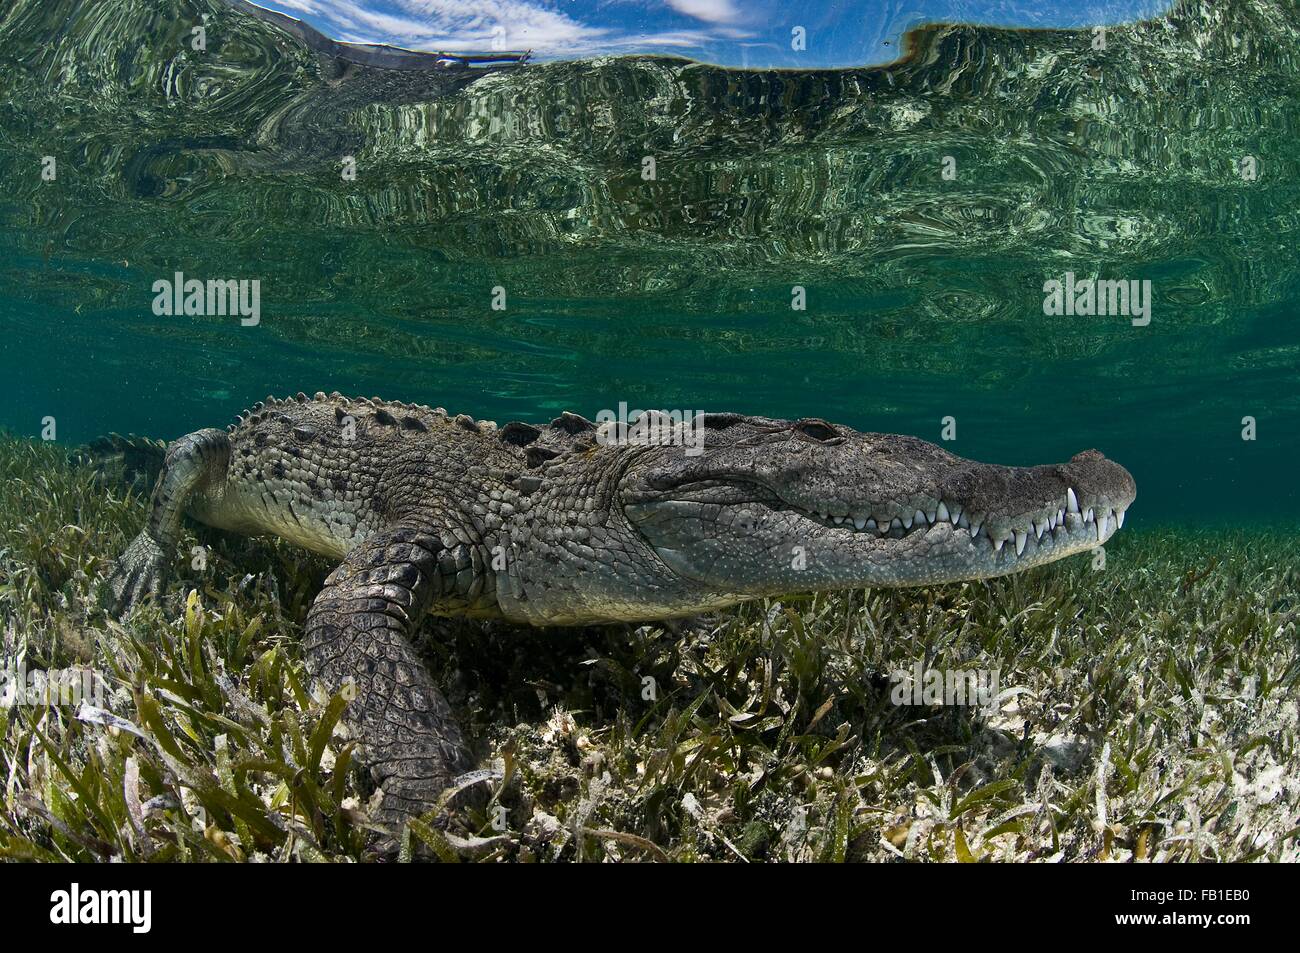 Underwater side view of crocodile on seagrass in shallow water, Chinchorro Atoll, Quintana Roo, Mexico Stock Photo